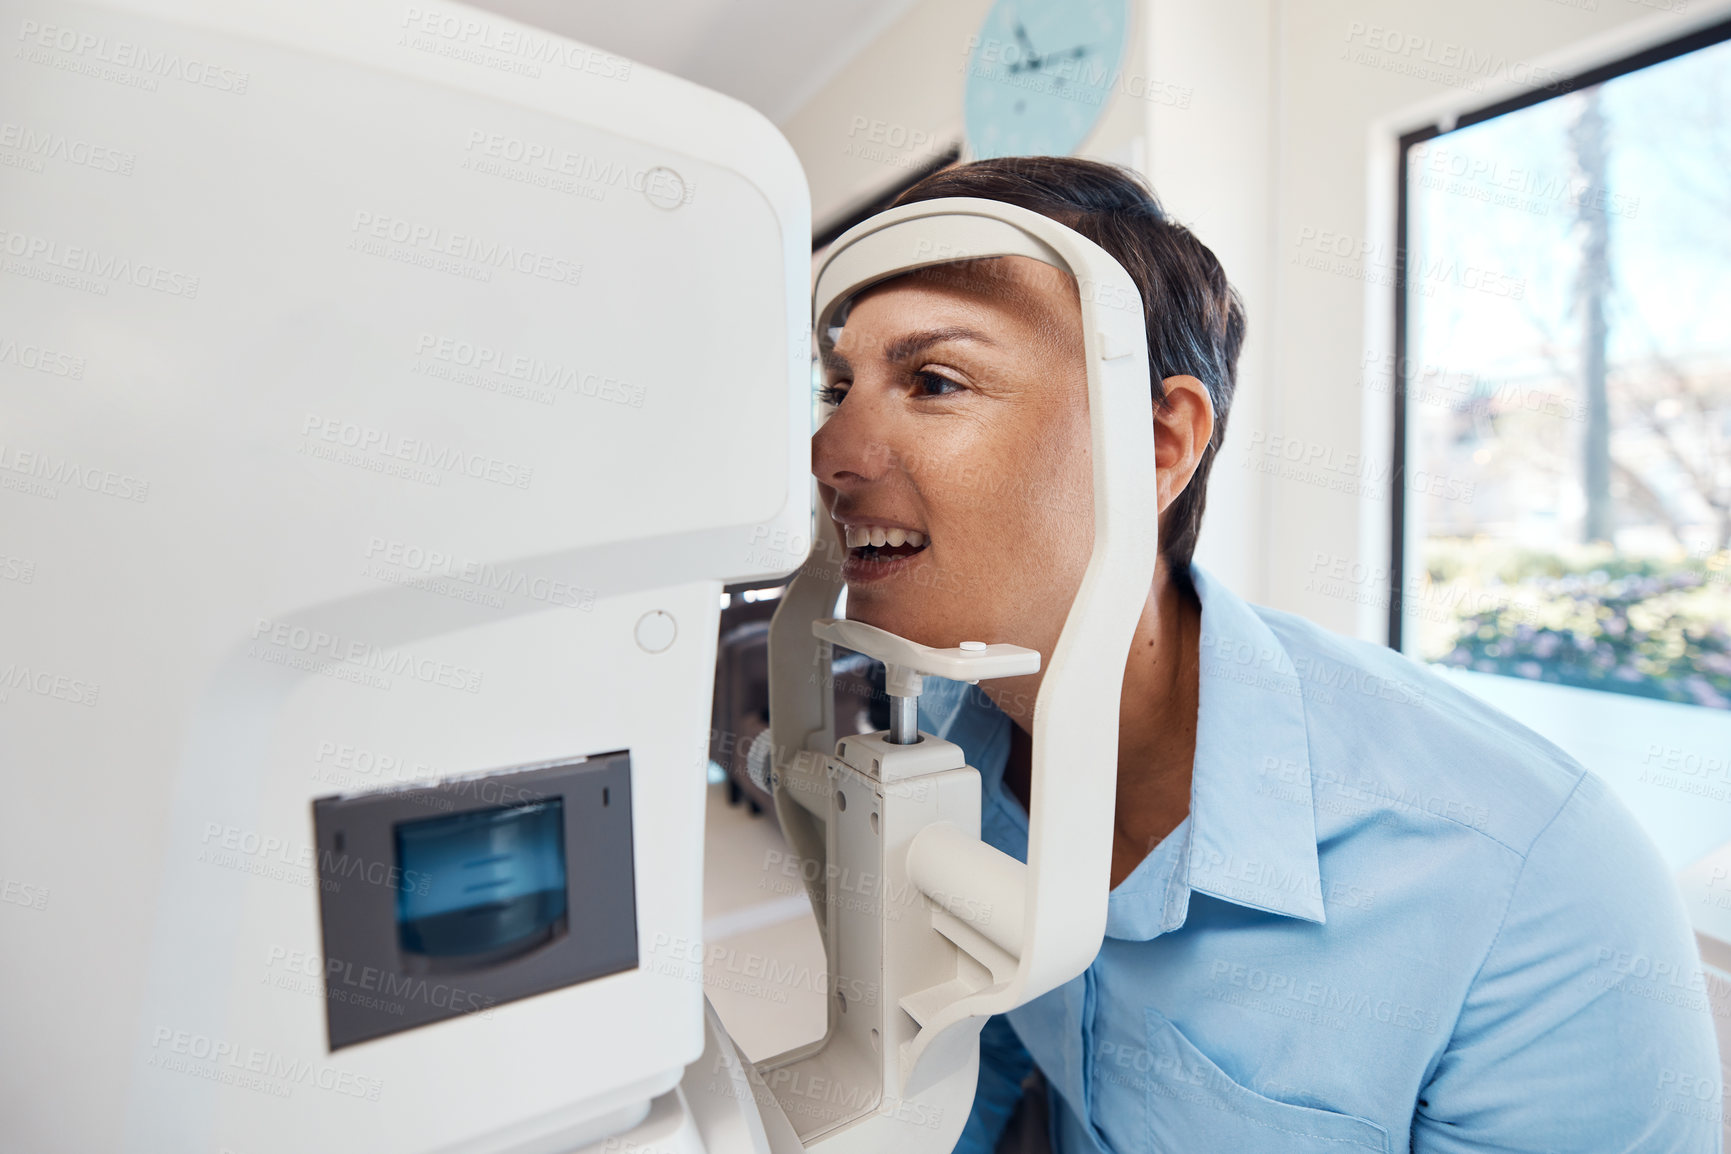 Buy stock photo An eye test, exam or screening for vision and eyesight at the optometrist or optician with a young woman. Testing her sight with an automated refractor for prescription glasses or contact lenses